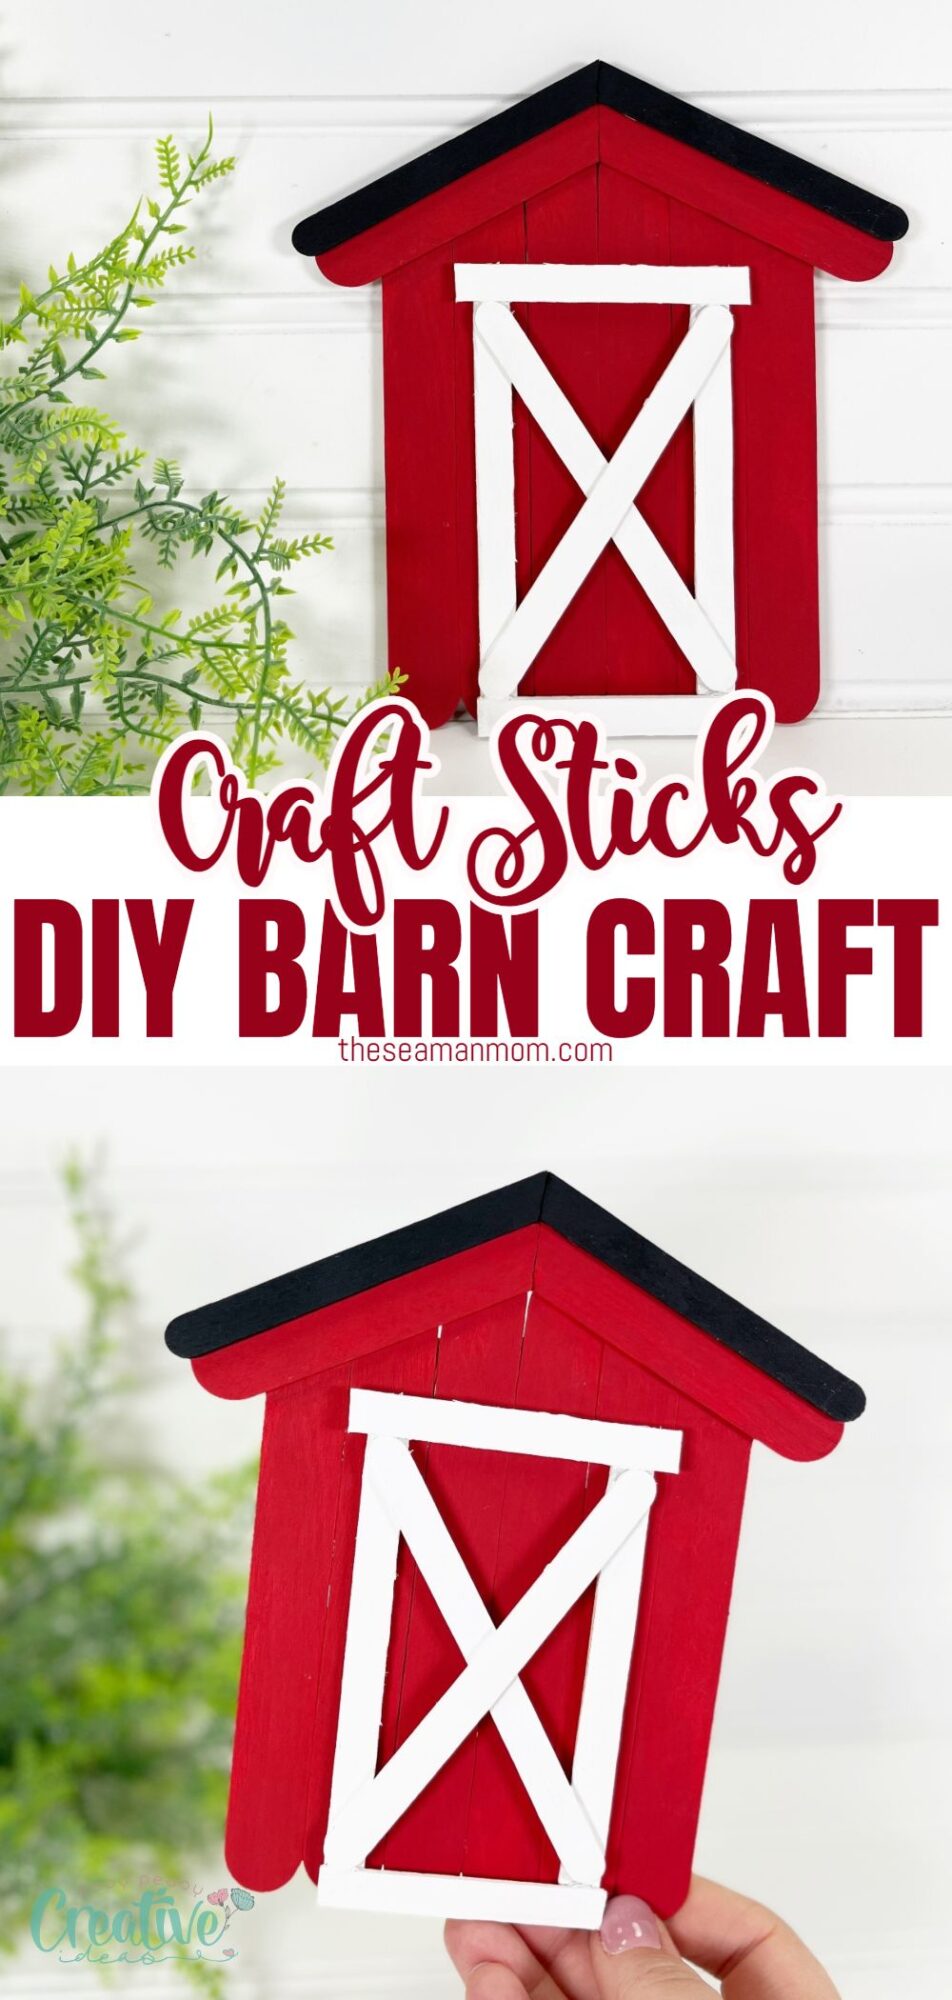 Make a cute barn craft with craft sticks! This DIY project is perfect for craft lovers of all levels, offering a fun and creative activity.